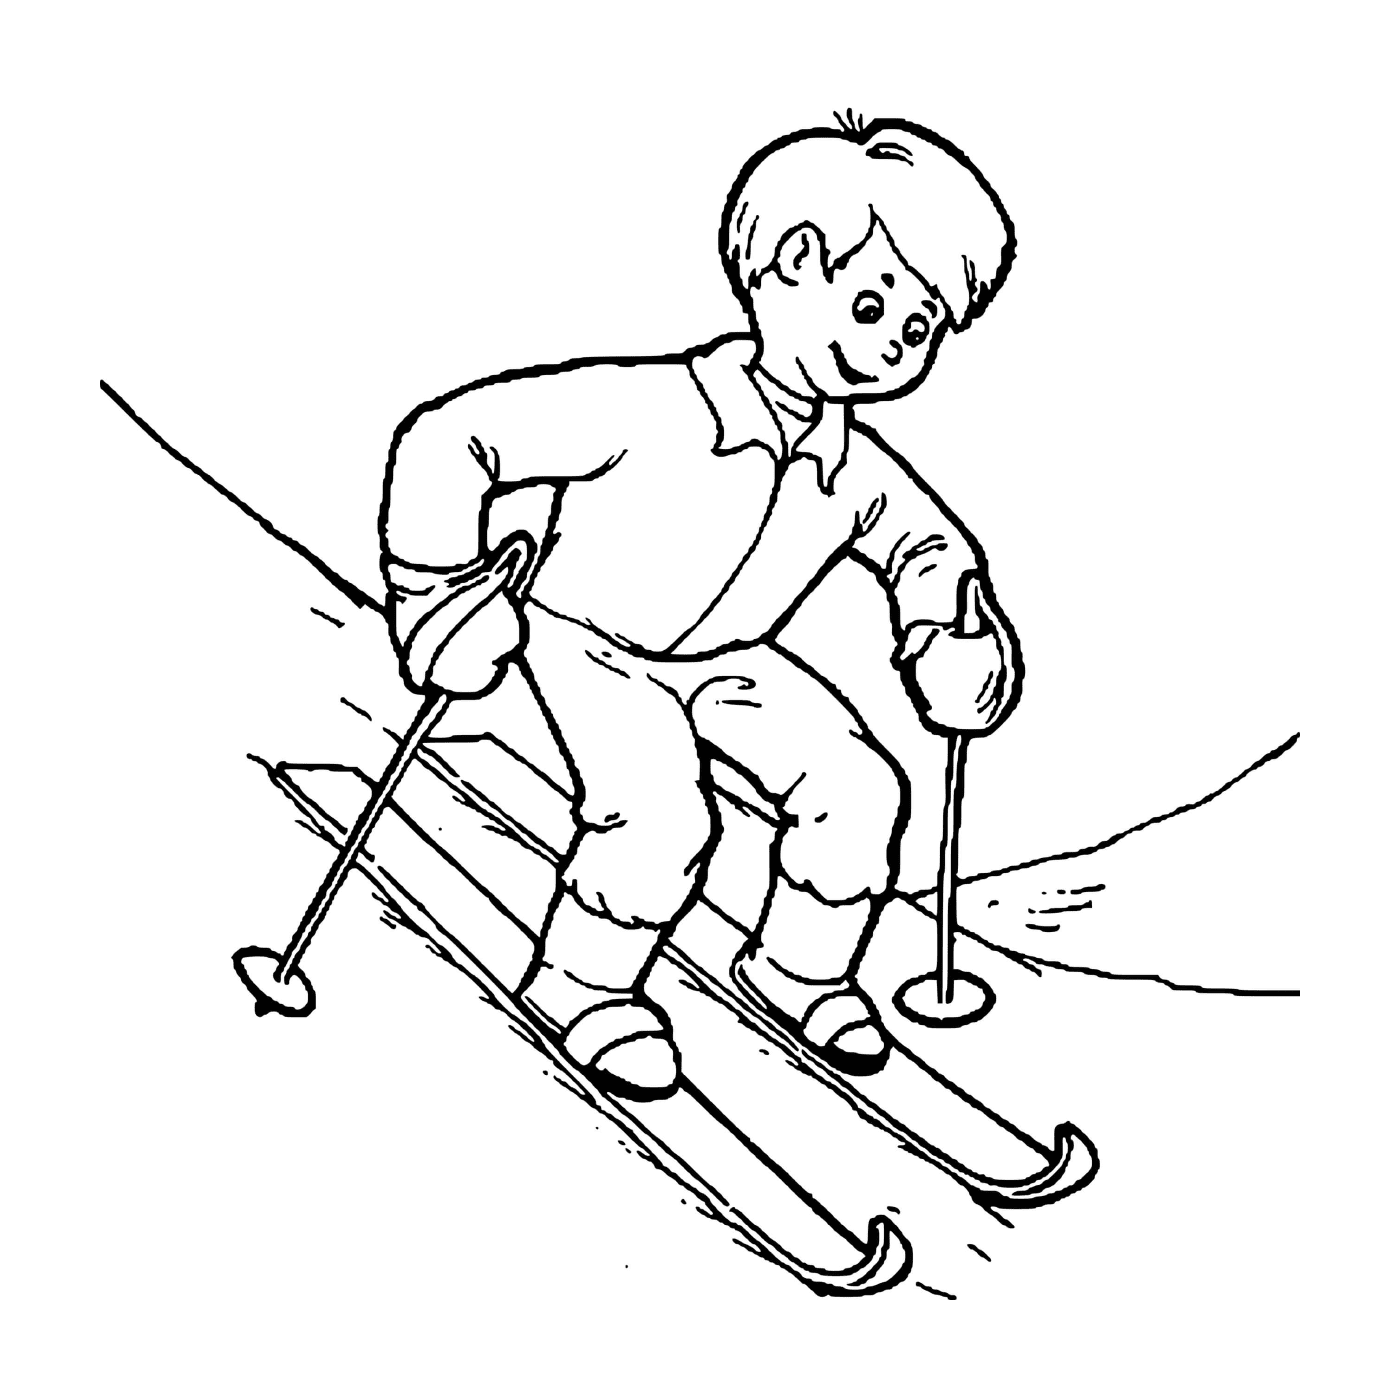  Child learns enthusiastic skiing 